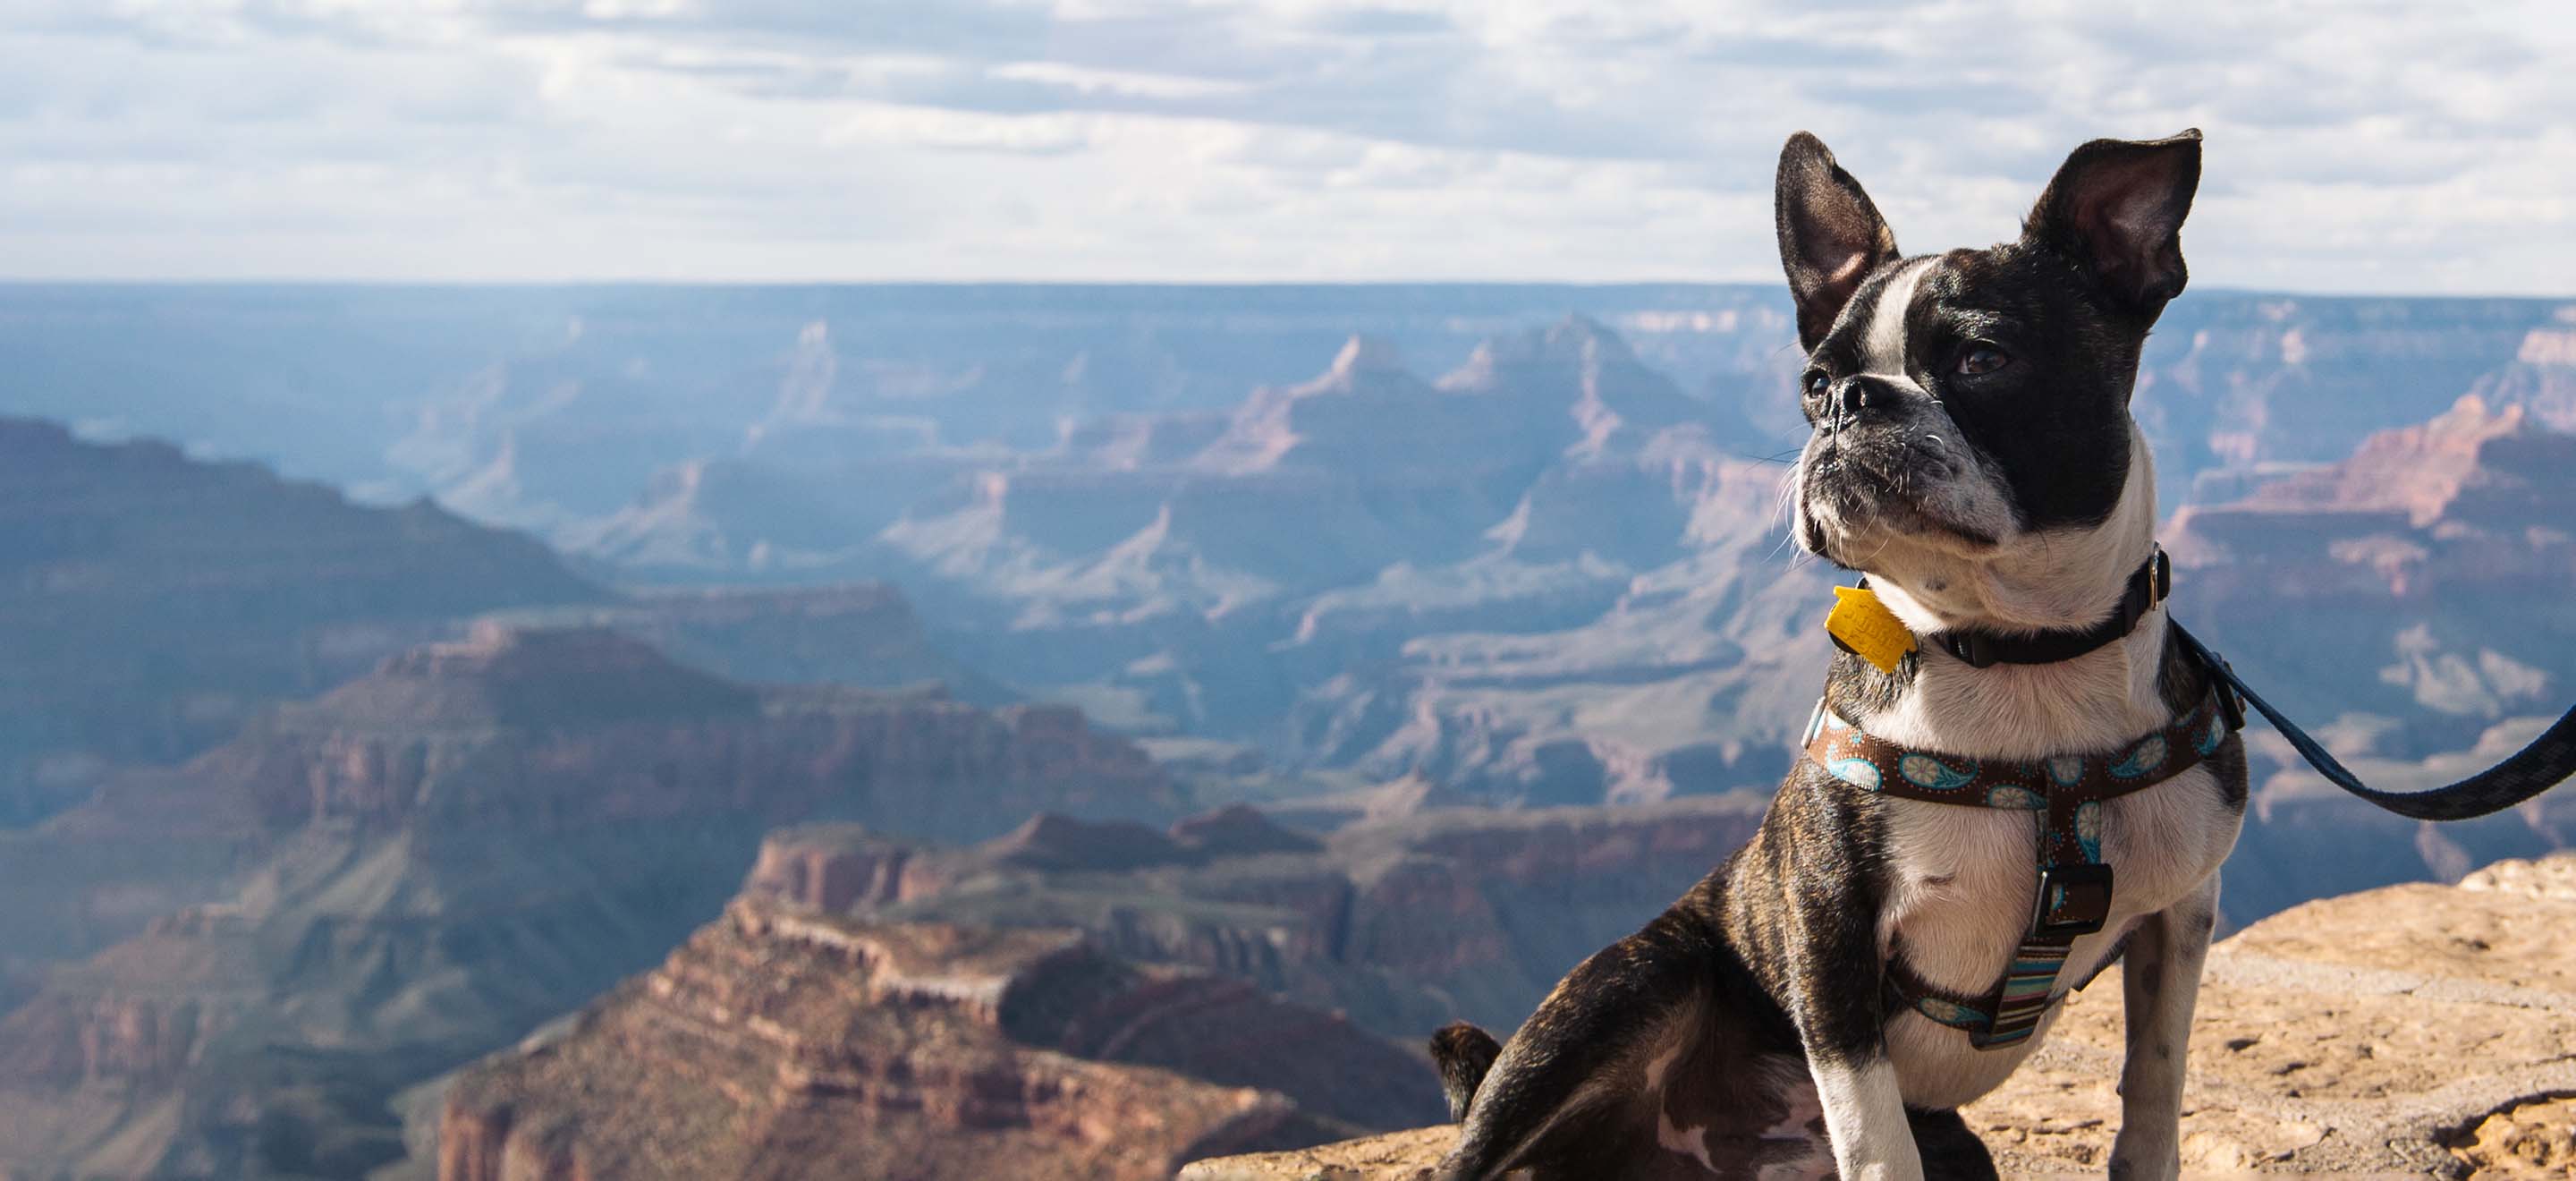 Black and white Boston Terrier dog wearing a harness and leash standing against the backdrop of Canyon scenery image